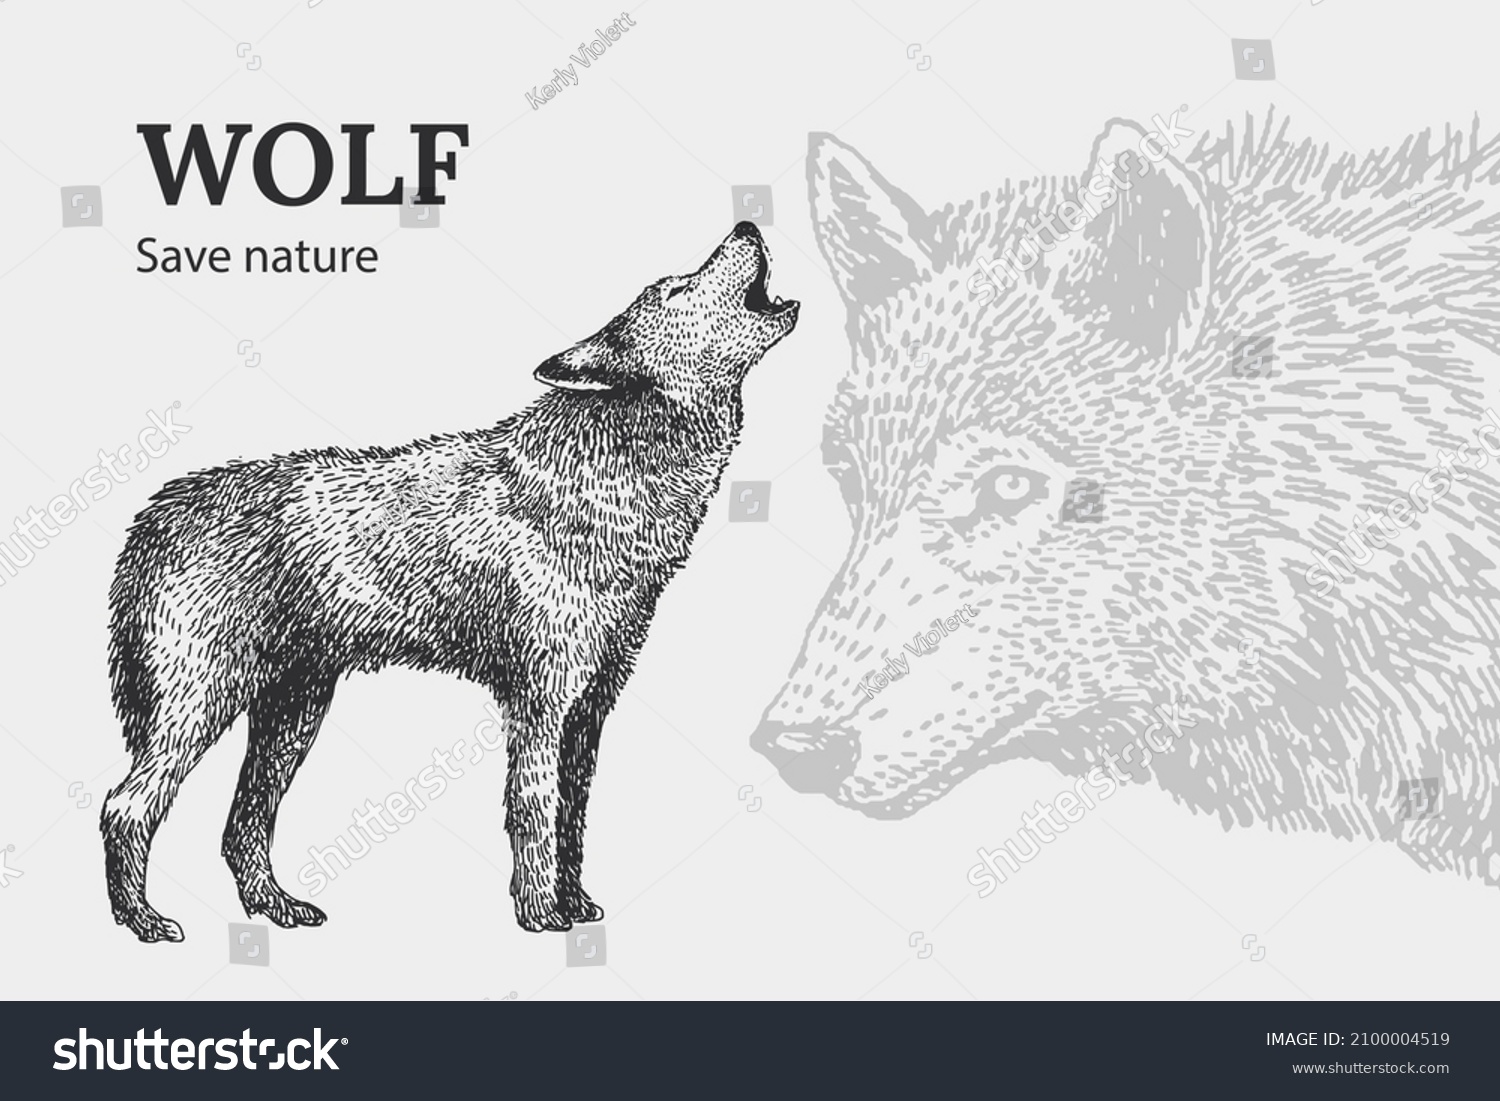 64,223 Wolf Drawing Images, Stock Photos & Vectors | Shutterstock